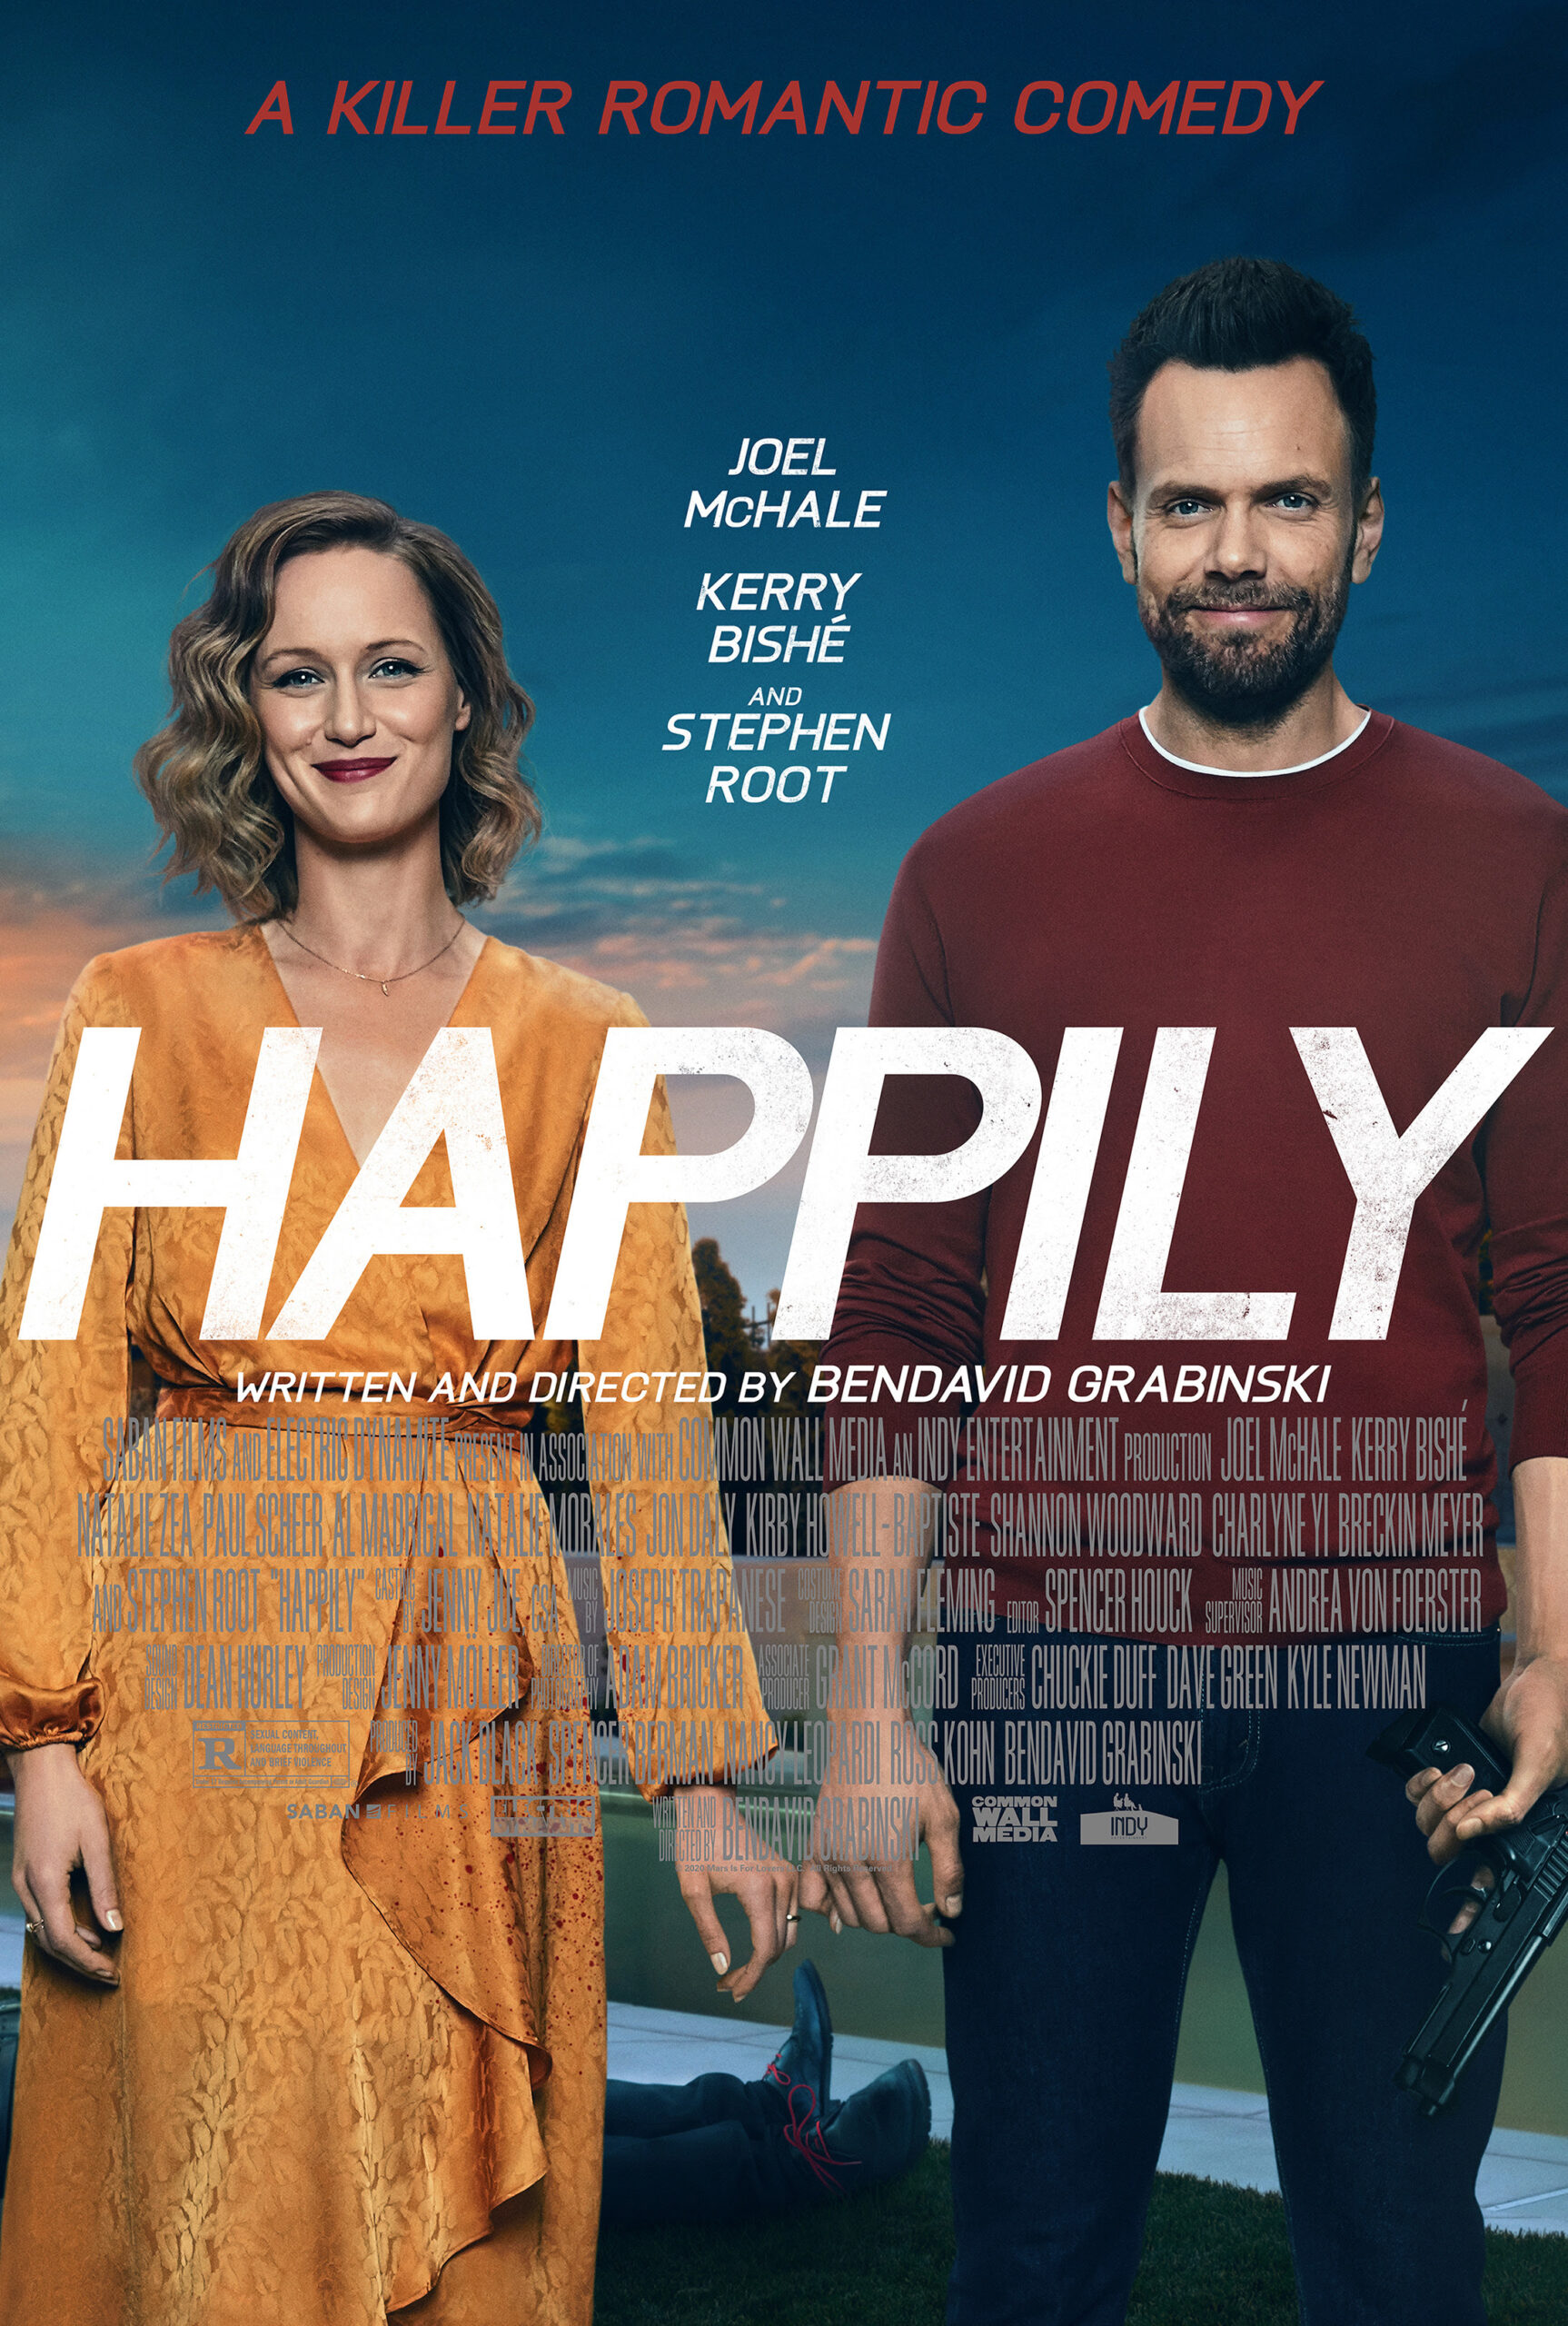 [News] HAPPILY - A Killer Romantic Comedy - Arrives March 19